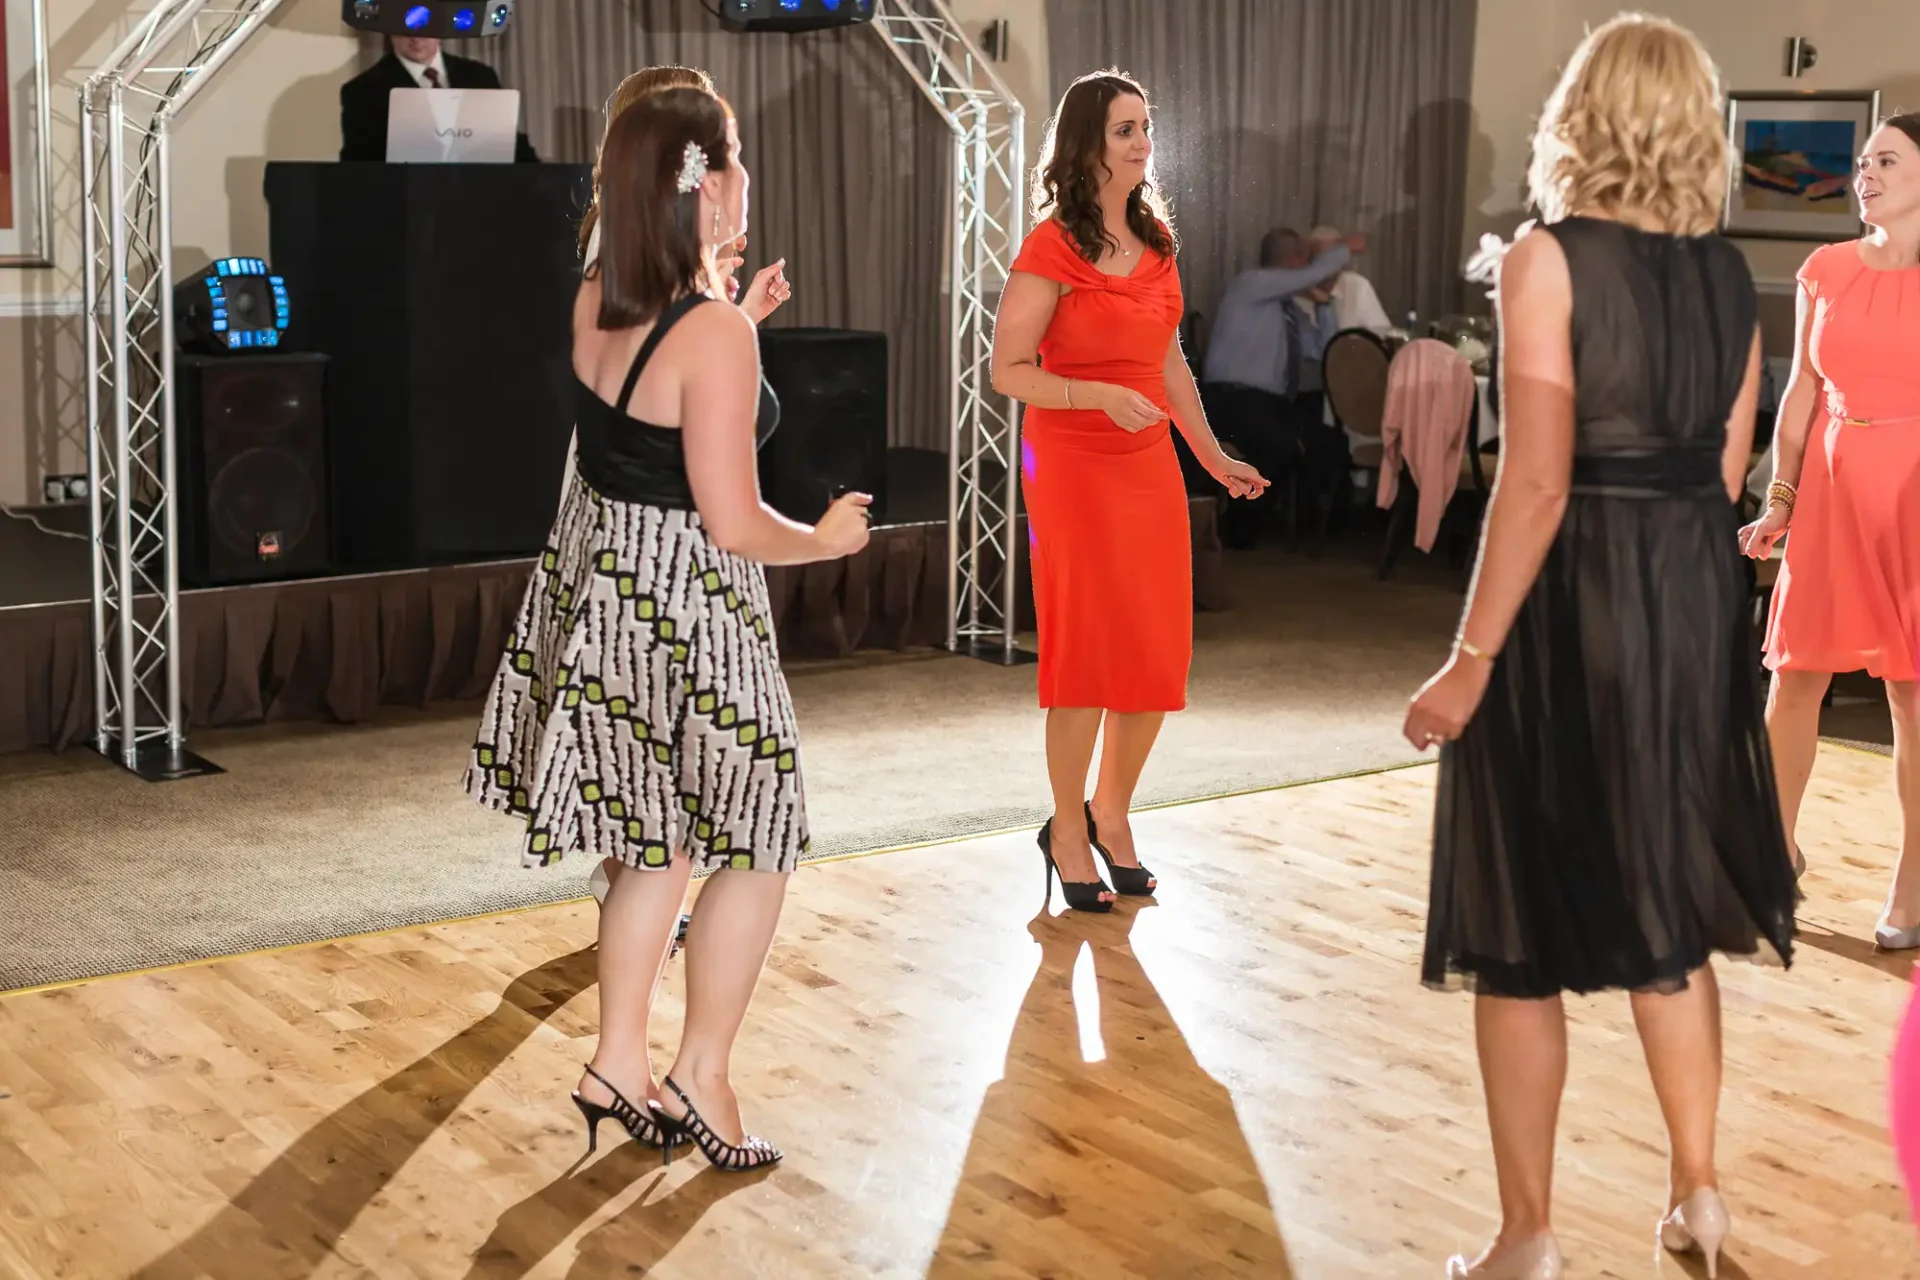 Four women dancing and interacting at a festive indoor event with a dj booth and lighting equipment in the background.